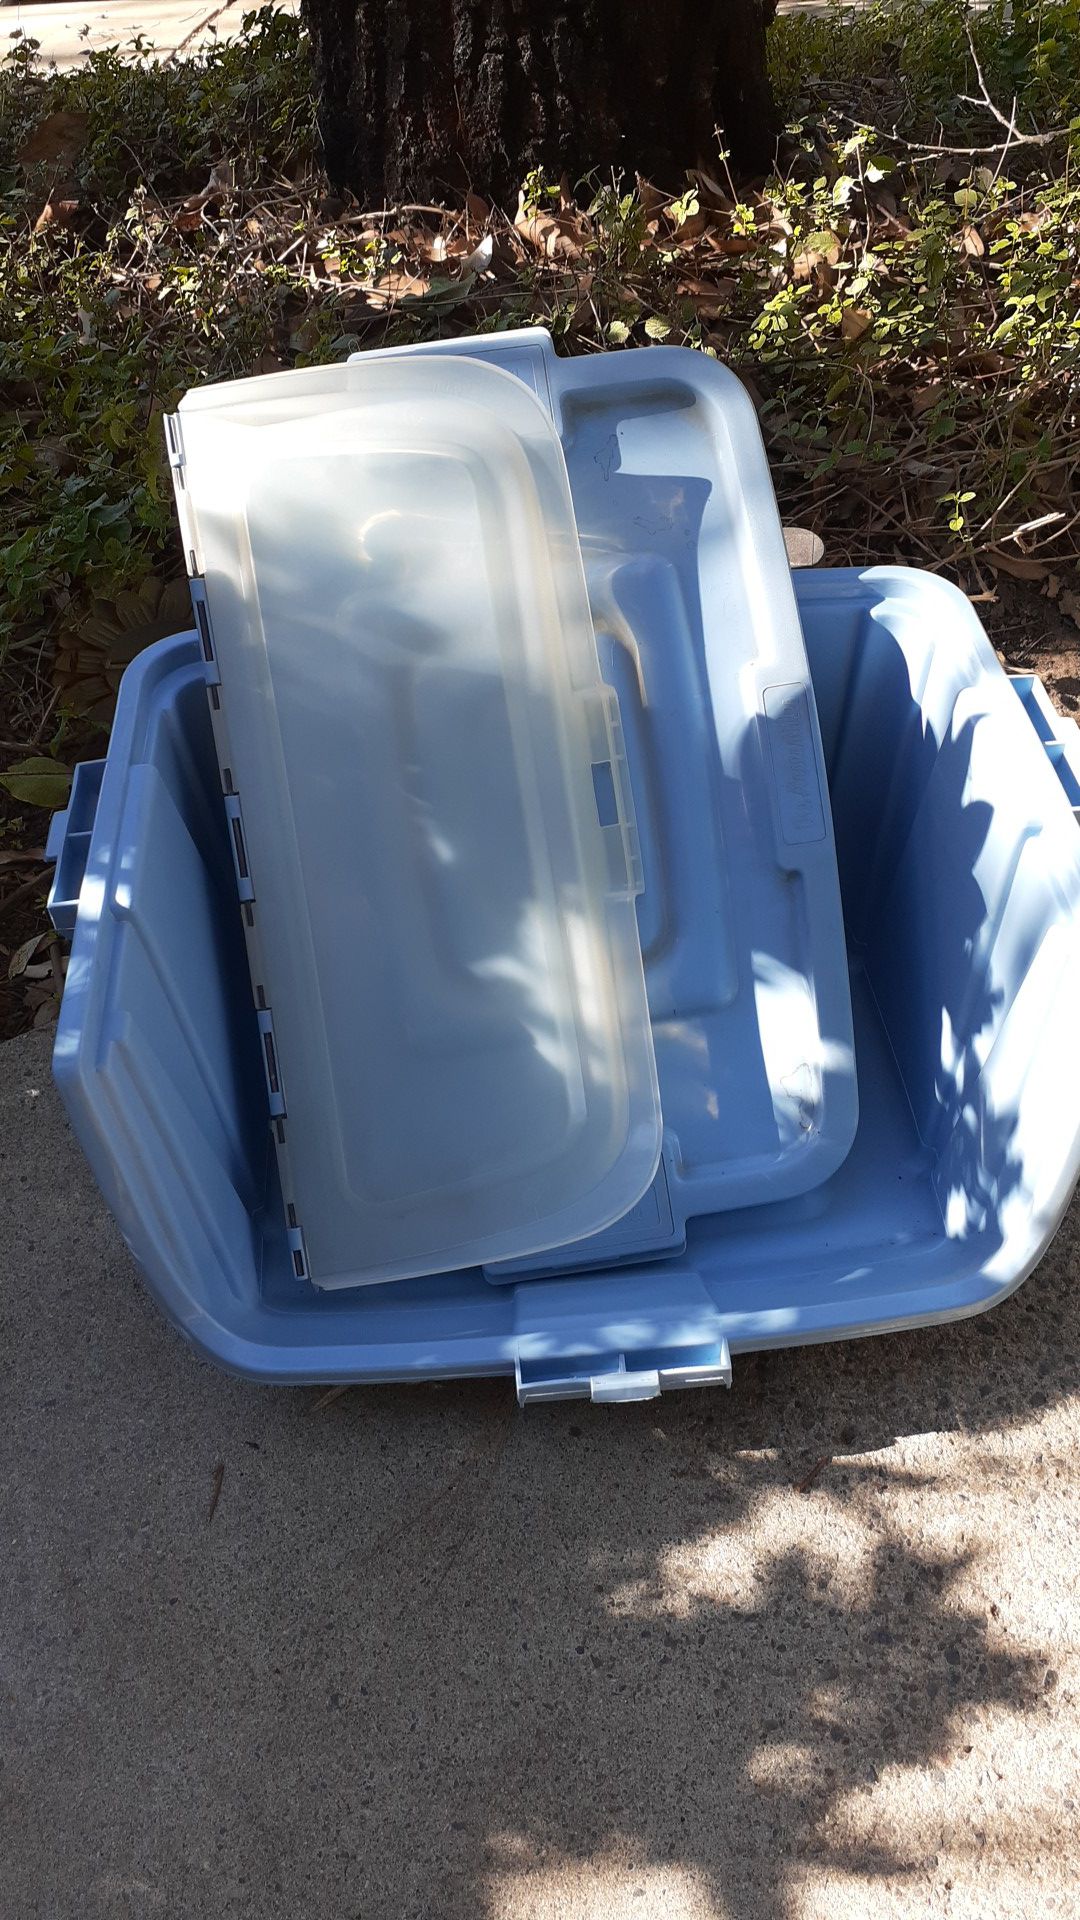 3 blue storage containers